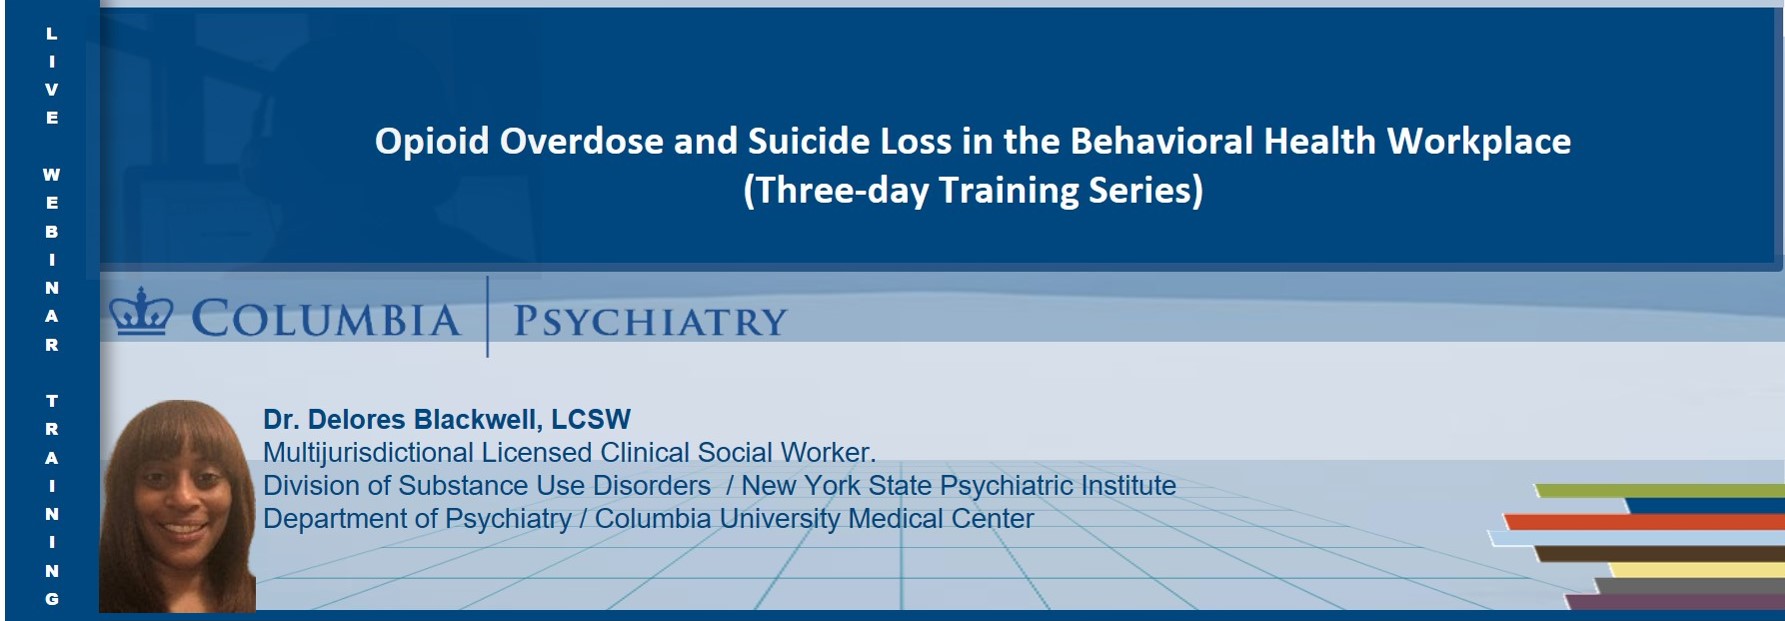 Opioid Overdose and Suicide Loss in Behavioral Health